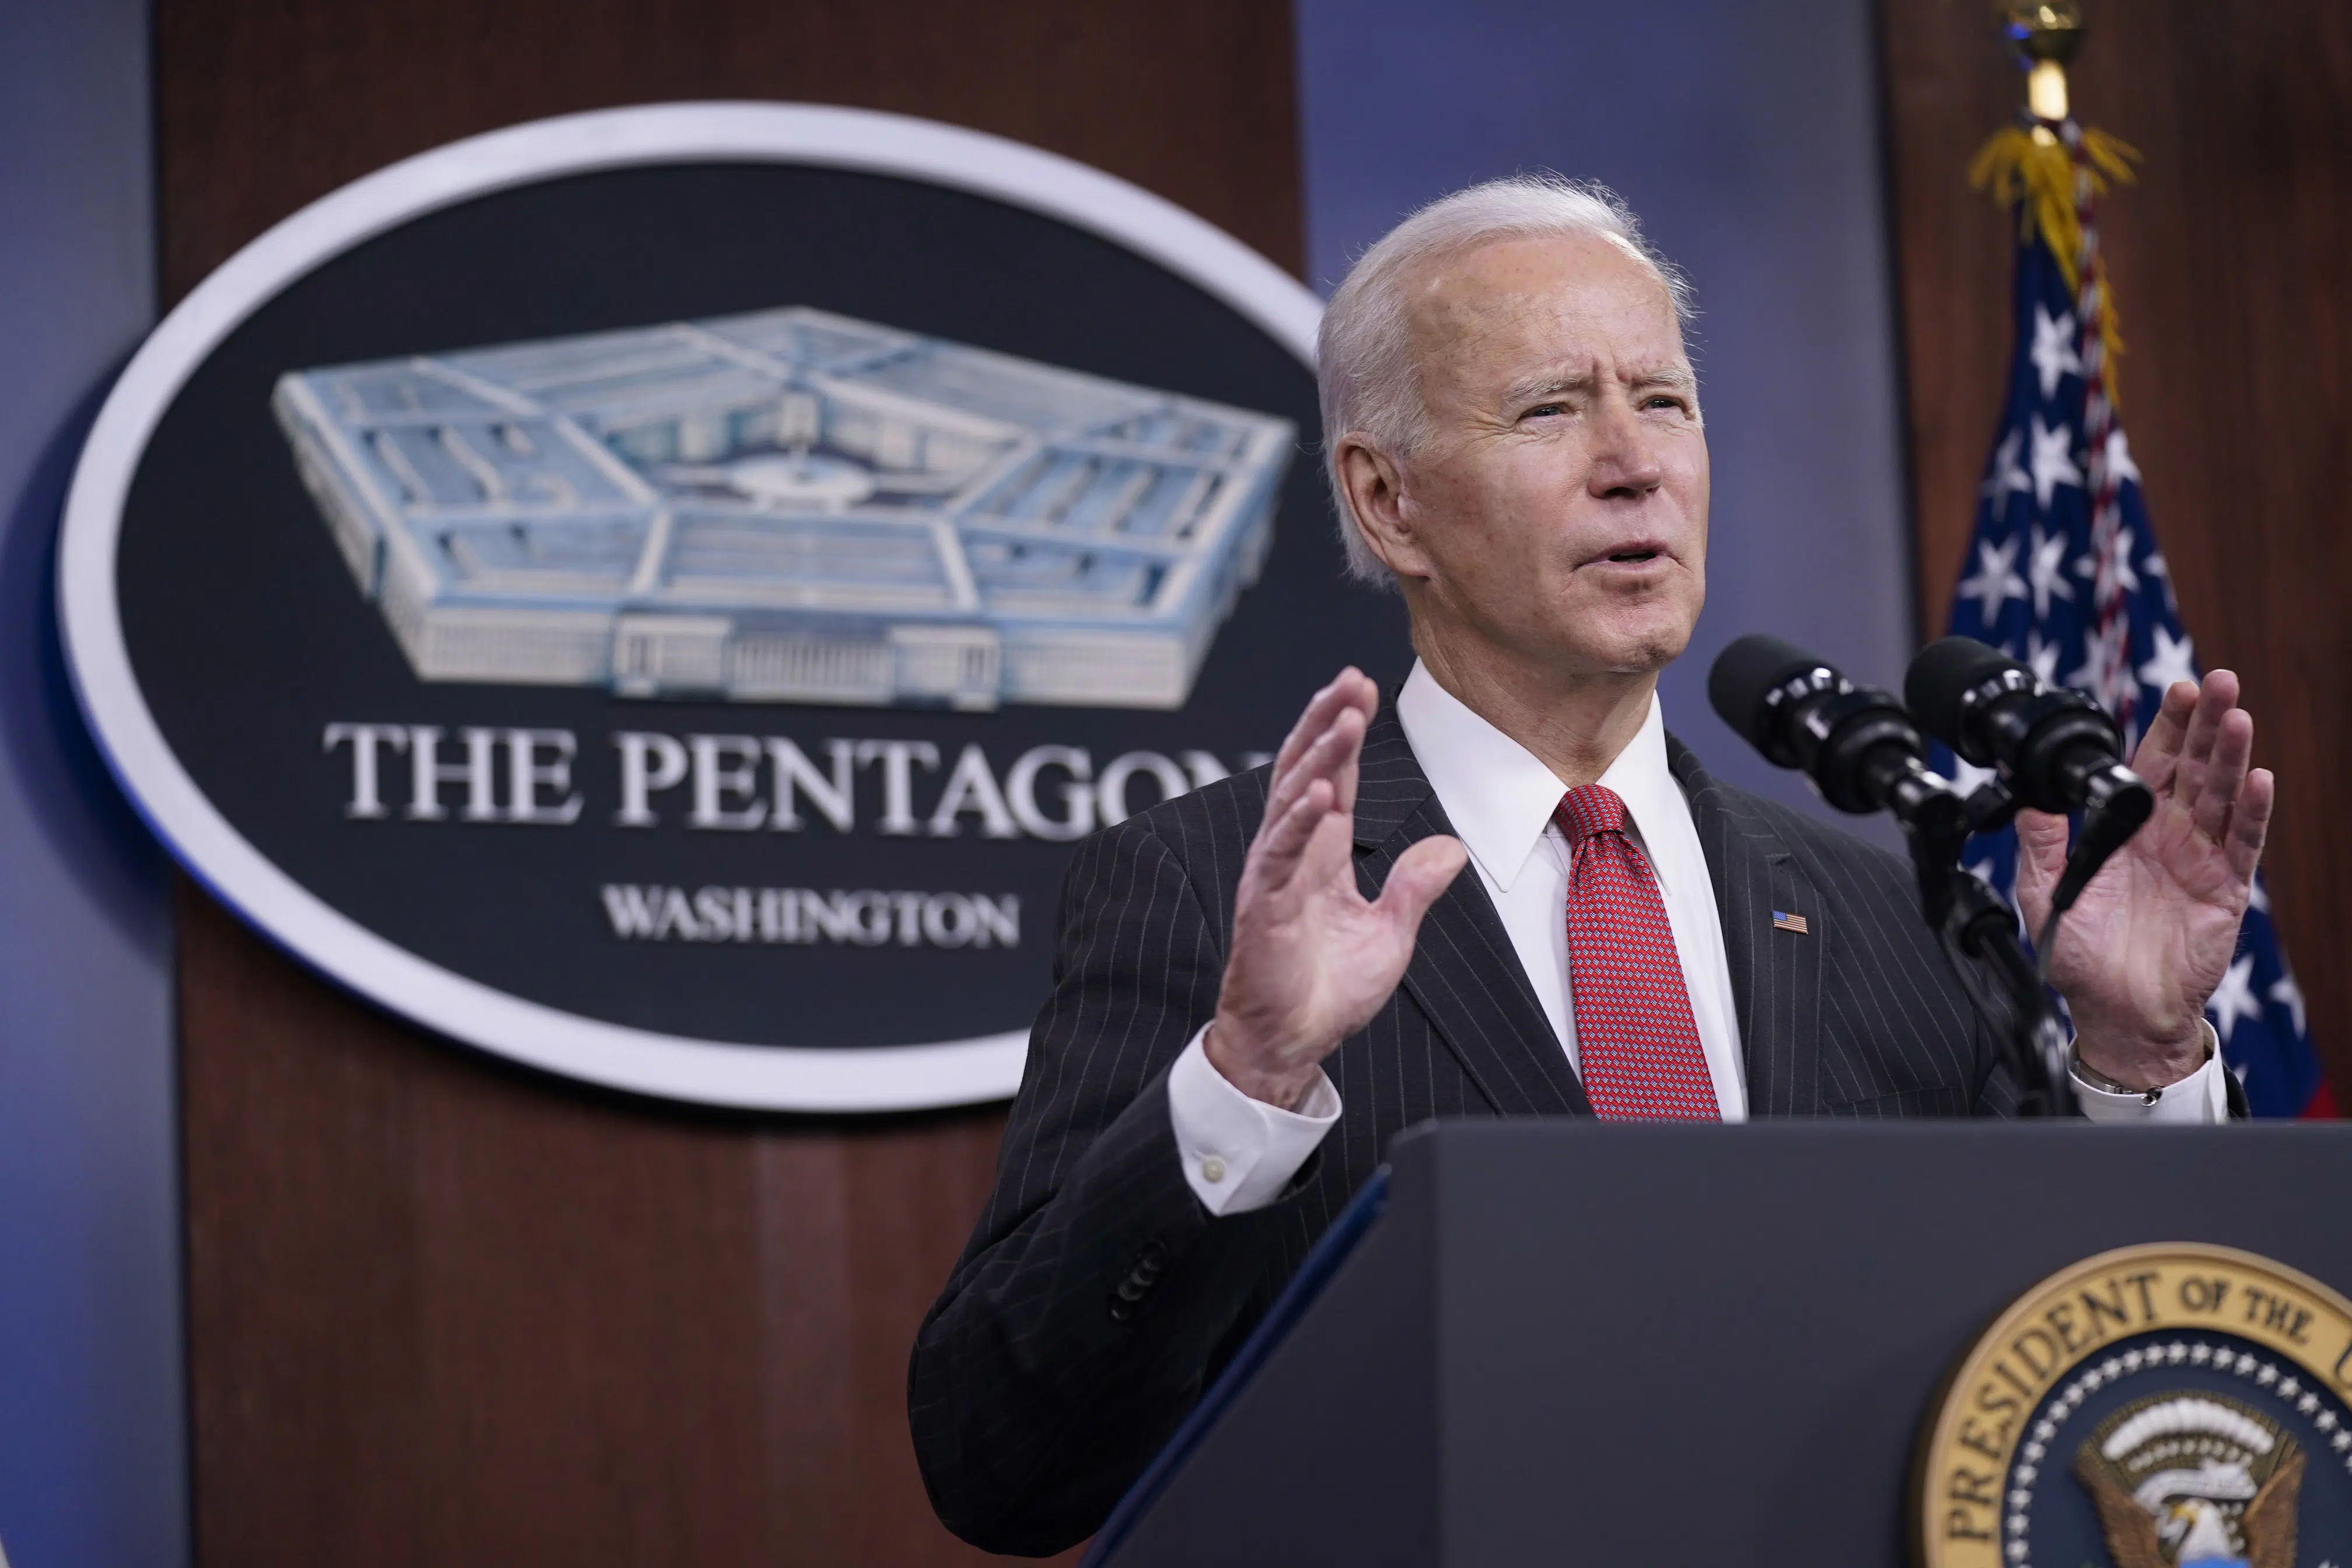 Biden Calls for Review of National Security Strategy on China During Pentagon Visit